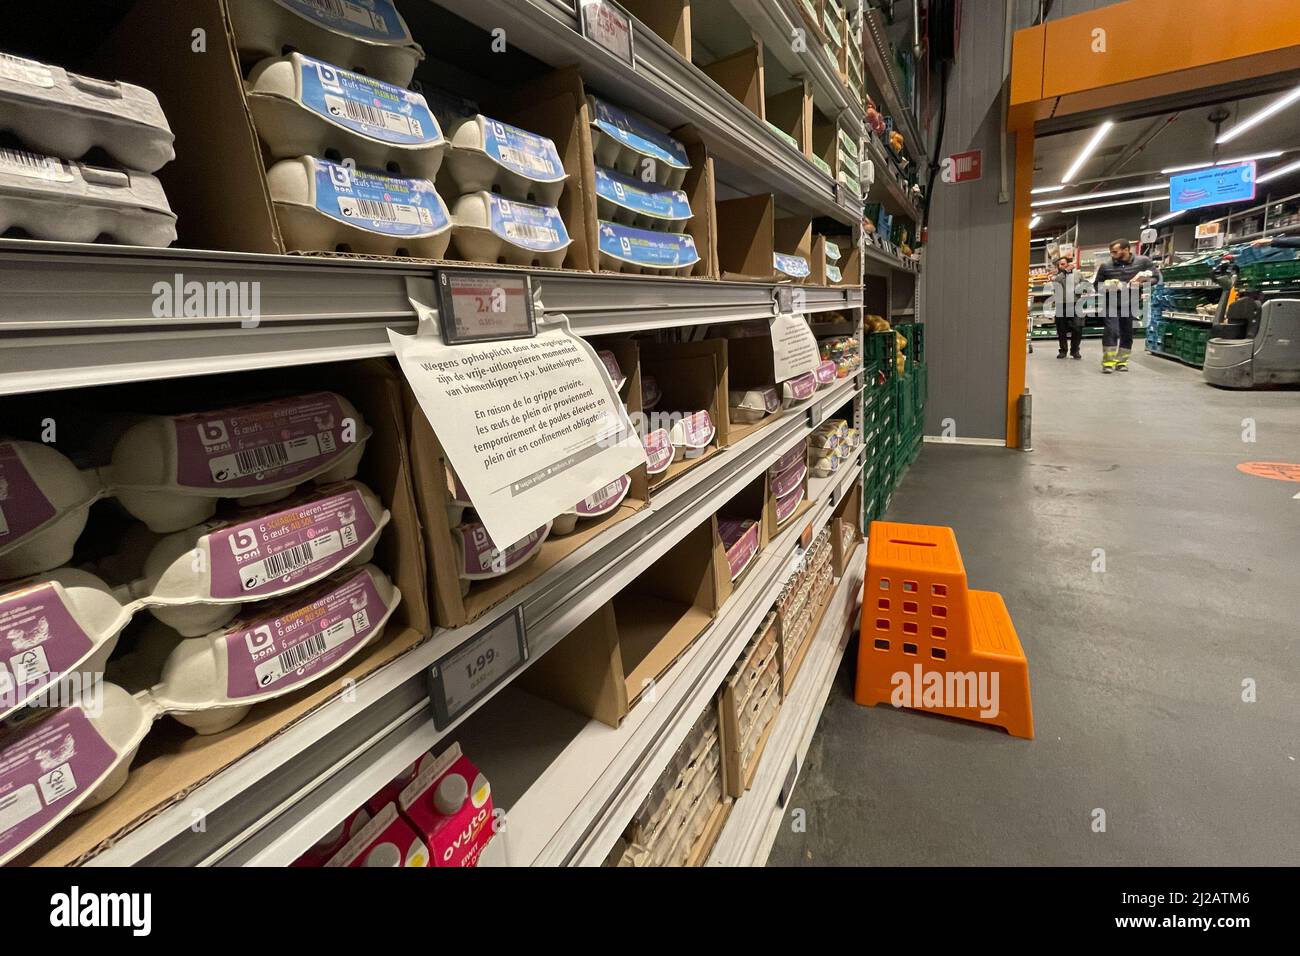 (220331) -- BRUSSELS, March 31, 2022 (Xinhua) -- A notice written in French and Dutch meaning 'Due to avian flu, free-range eggs temporarily come from free-range hens in compulsory confinement' is seen as boxes of eggs are placed on the shelf in a supermarket in Brussels, Belgium, March 29, 2022. An outbreak of the highly pathogenic H5N1 avian influenza, also known as bird flu, has been detected in a poultry farm in Meulebeke in the province of West Flanders, Belgium, according to an official report published Wednesday by the Federal Agency for the Safety of the Food Chain (AFSCA). (Xinhua/Zhe Stock Photo